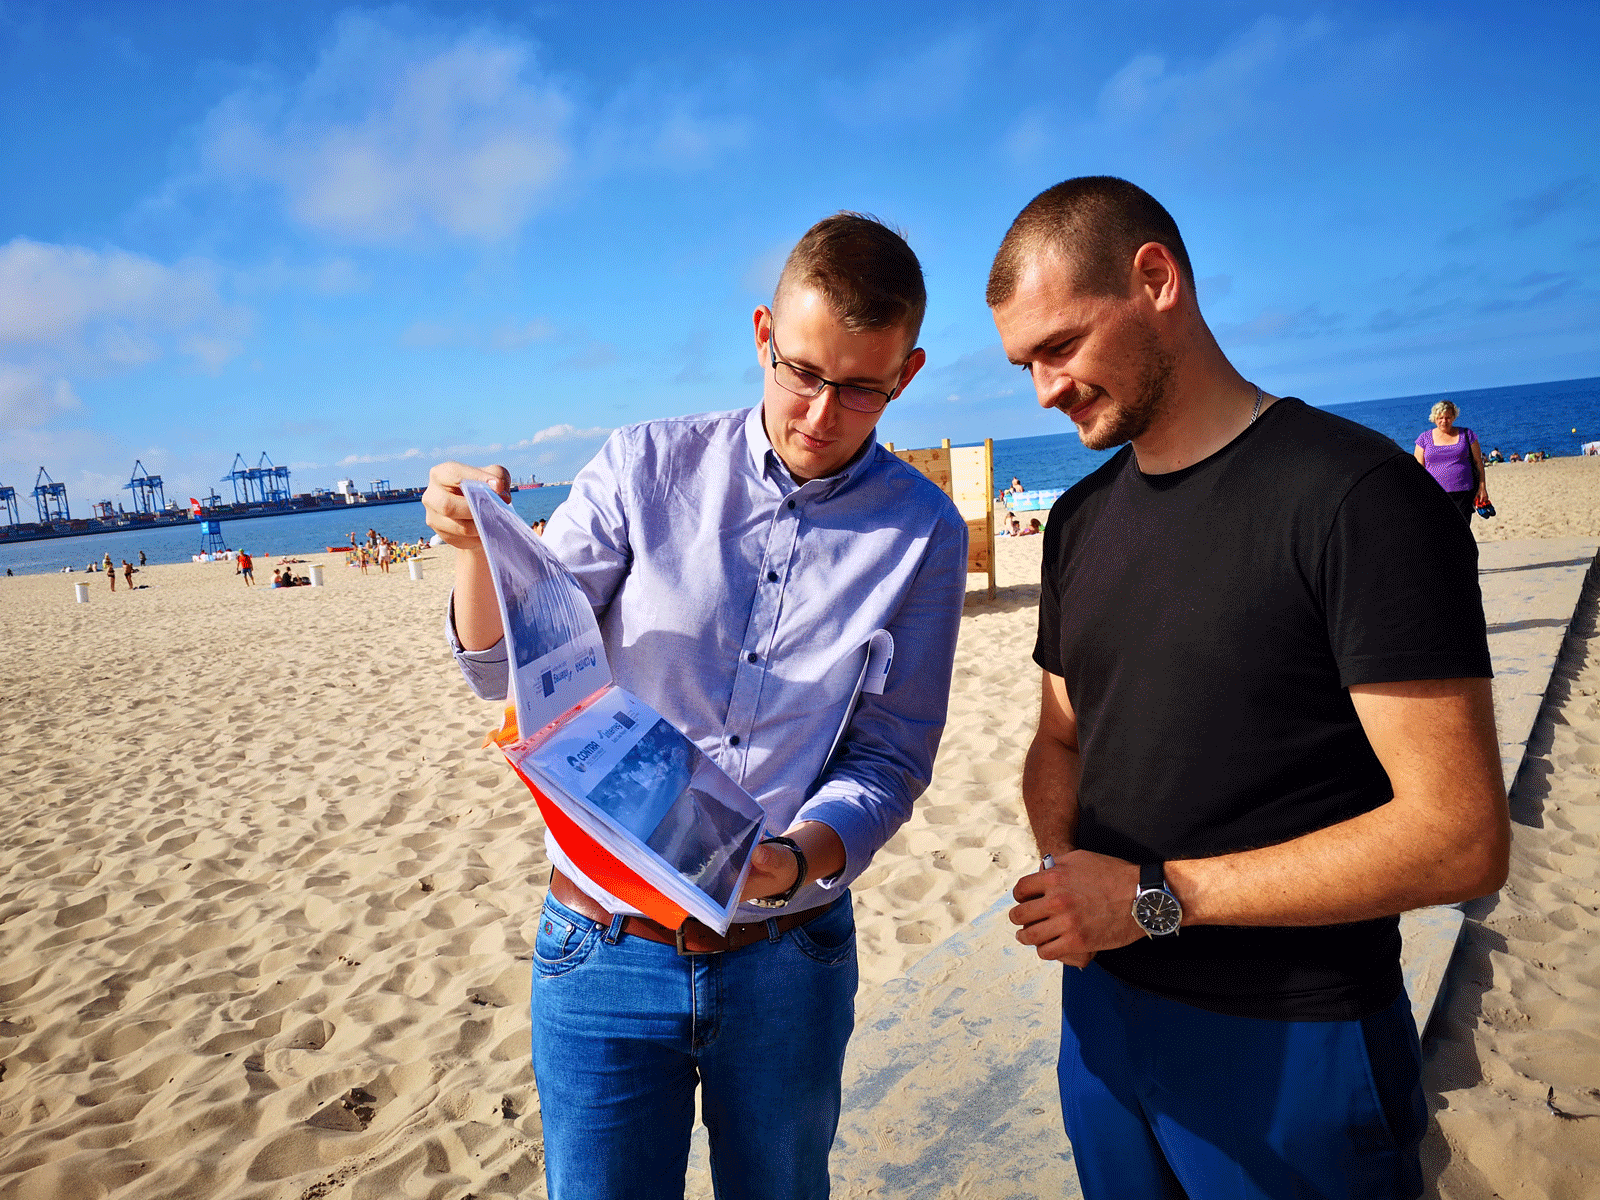 Two men are looking at a file of photos on a beach.